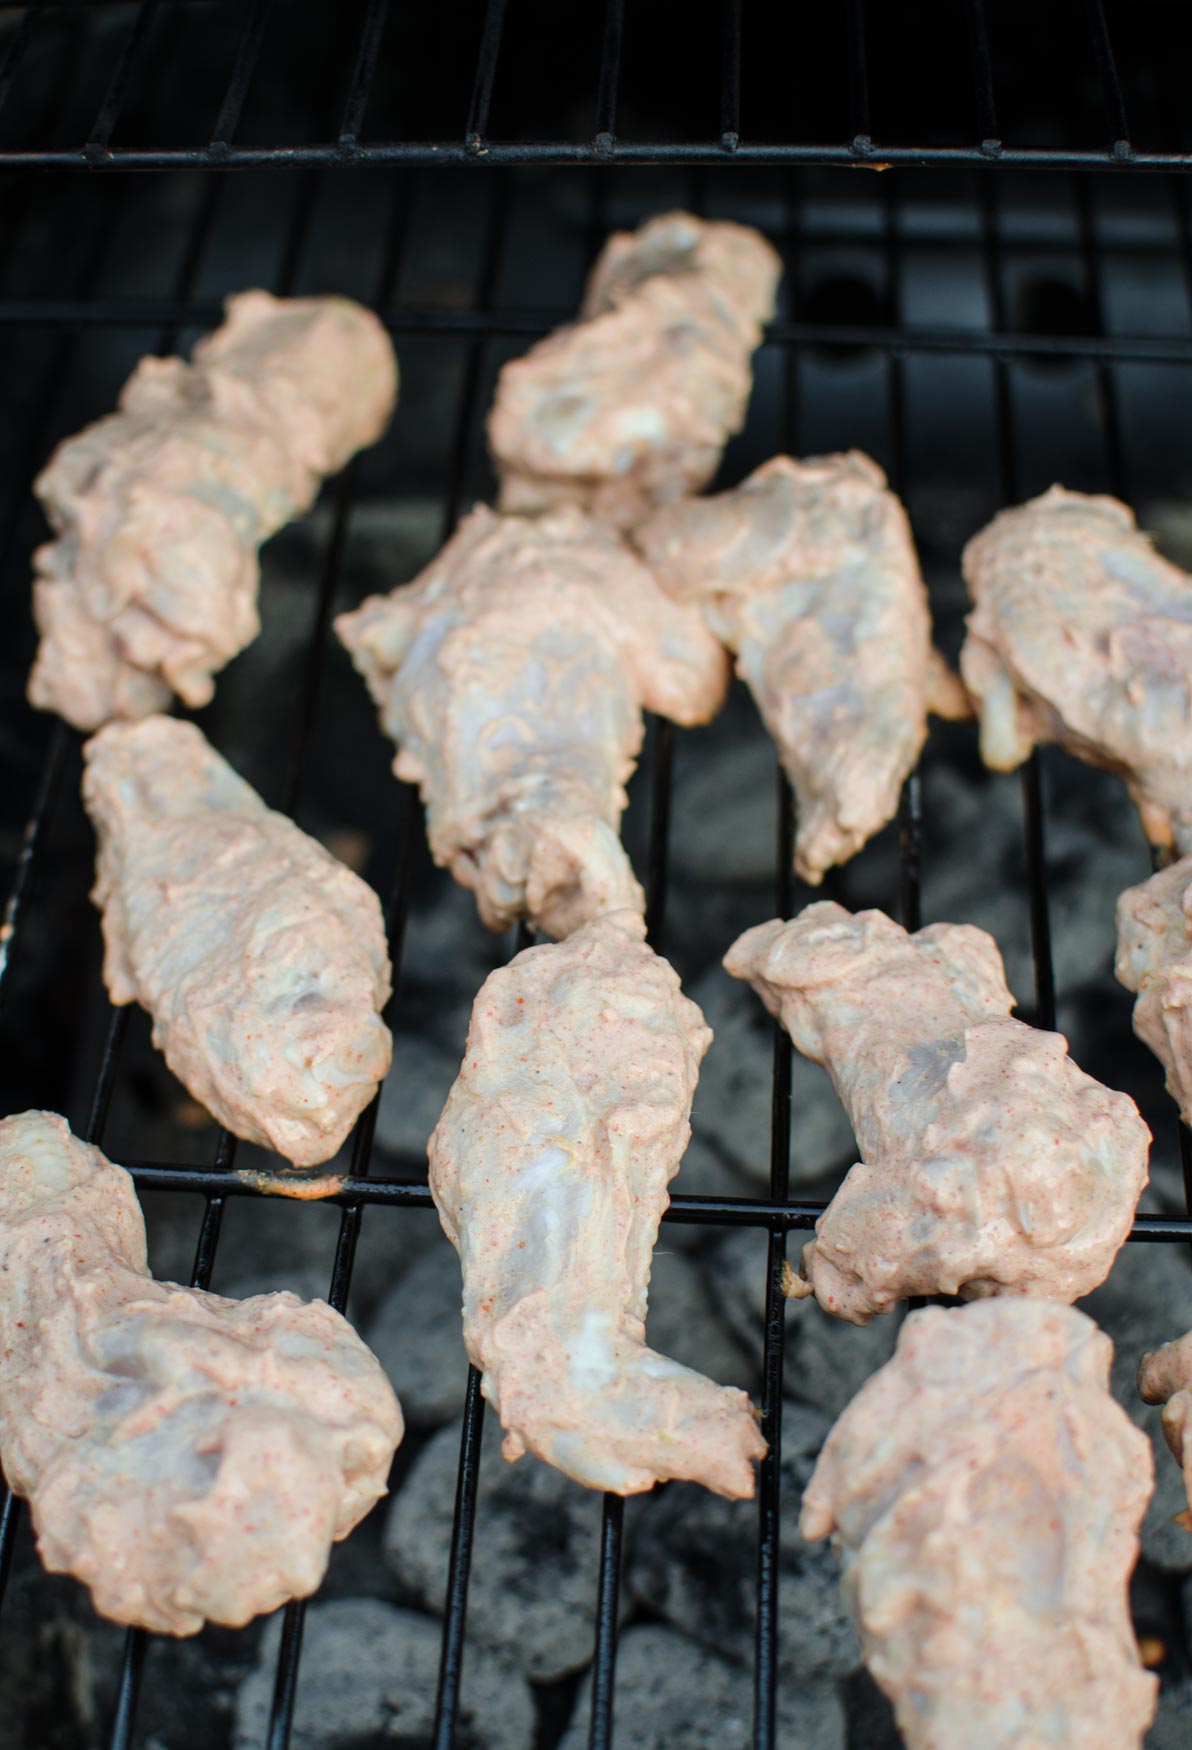 Marinated chicken wings are placed on barbecue rack. 